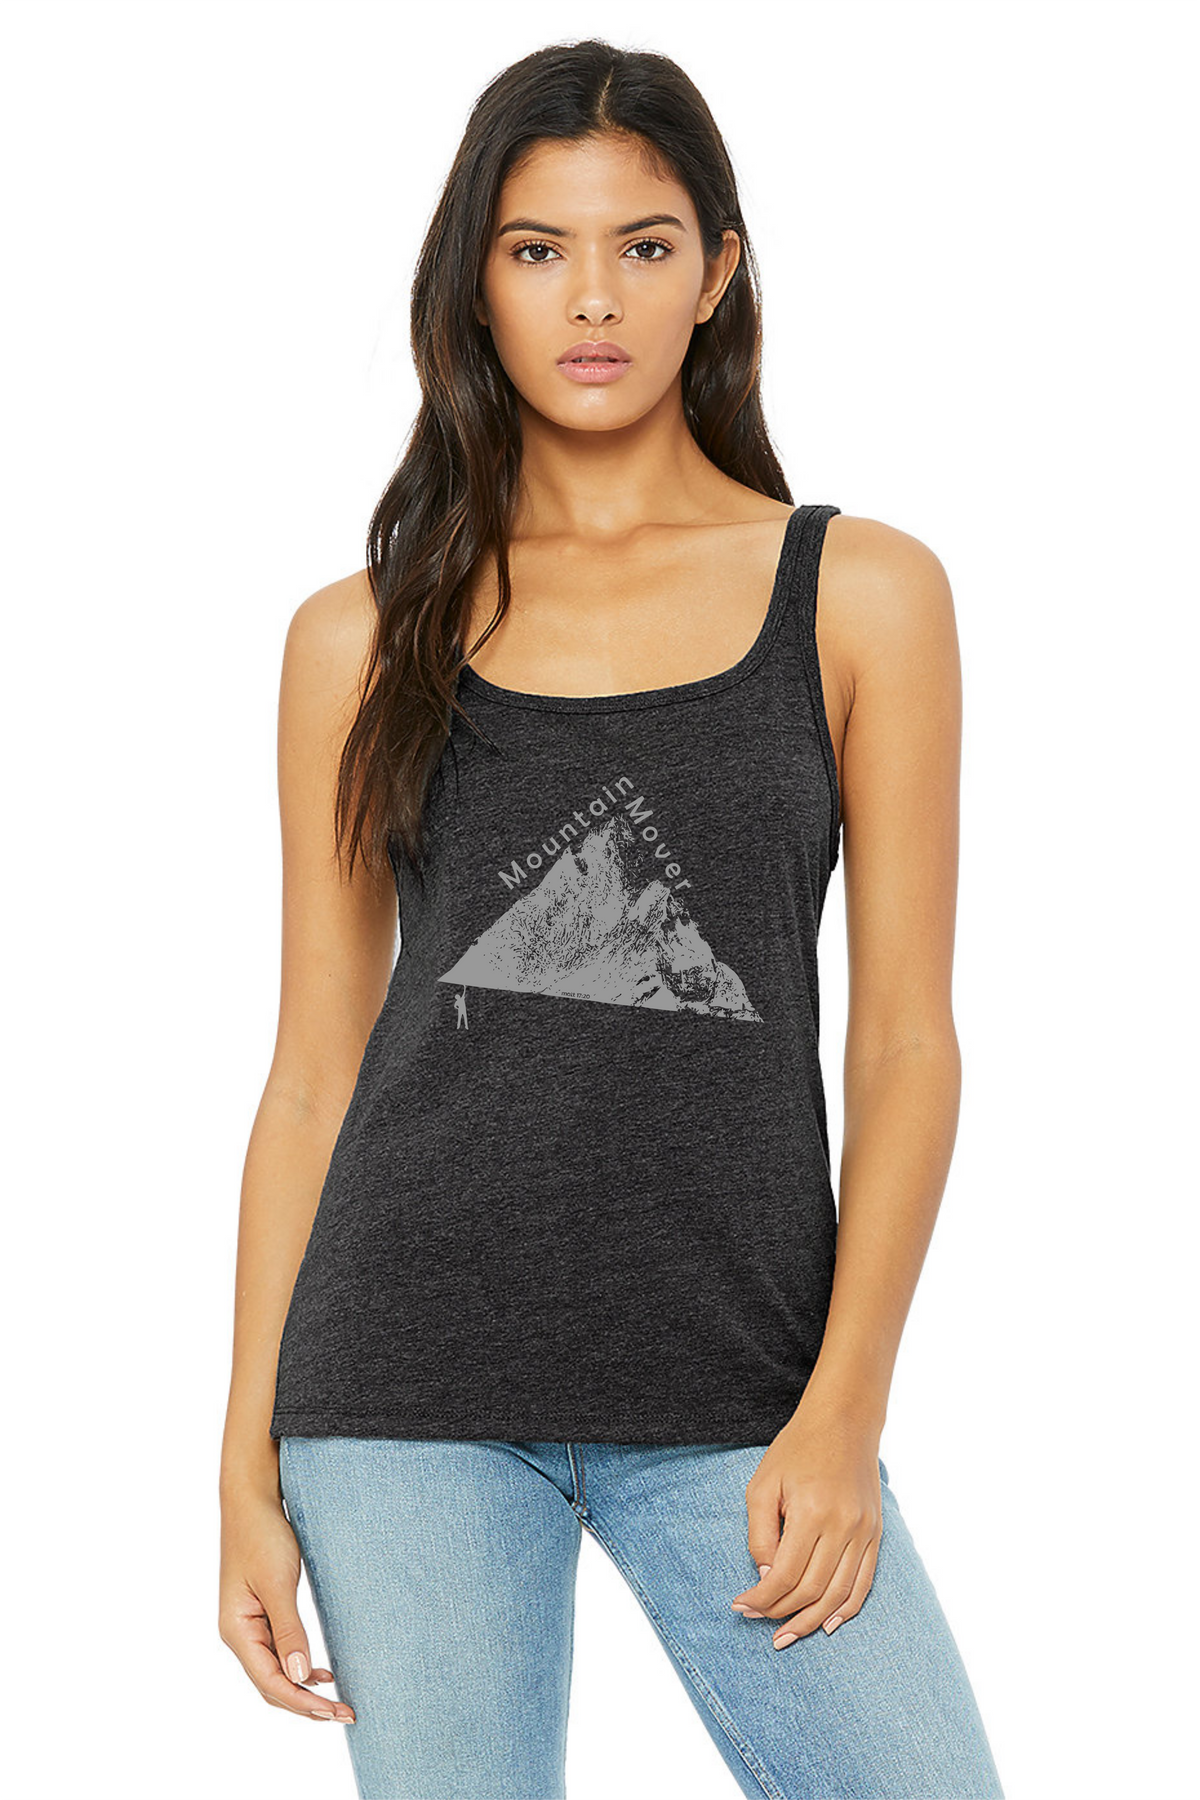 Mountain Mover - Adult Womens Tank